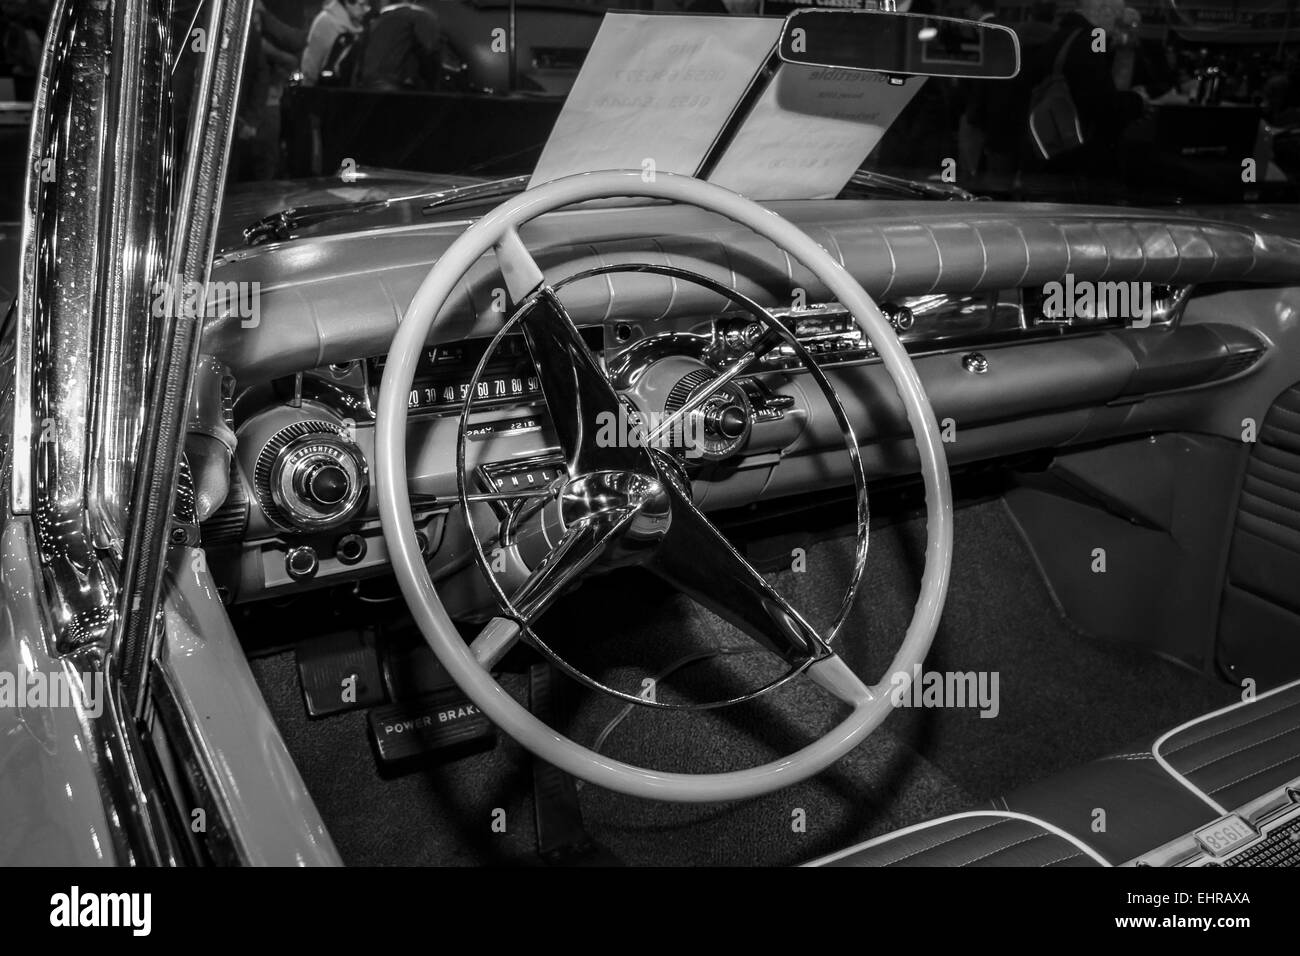 Cabin of a full-size car Buick Century Riviera convertible, 1958. Stock Photo